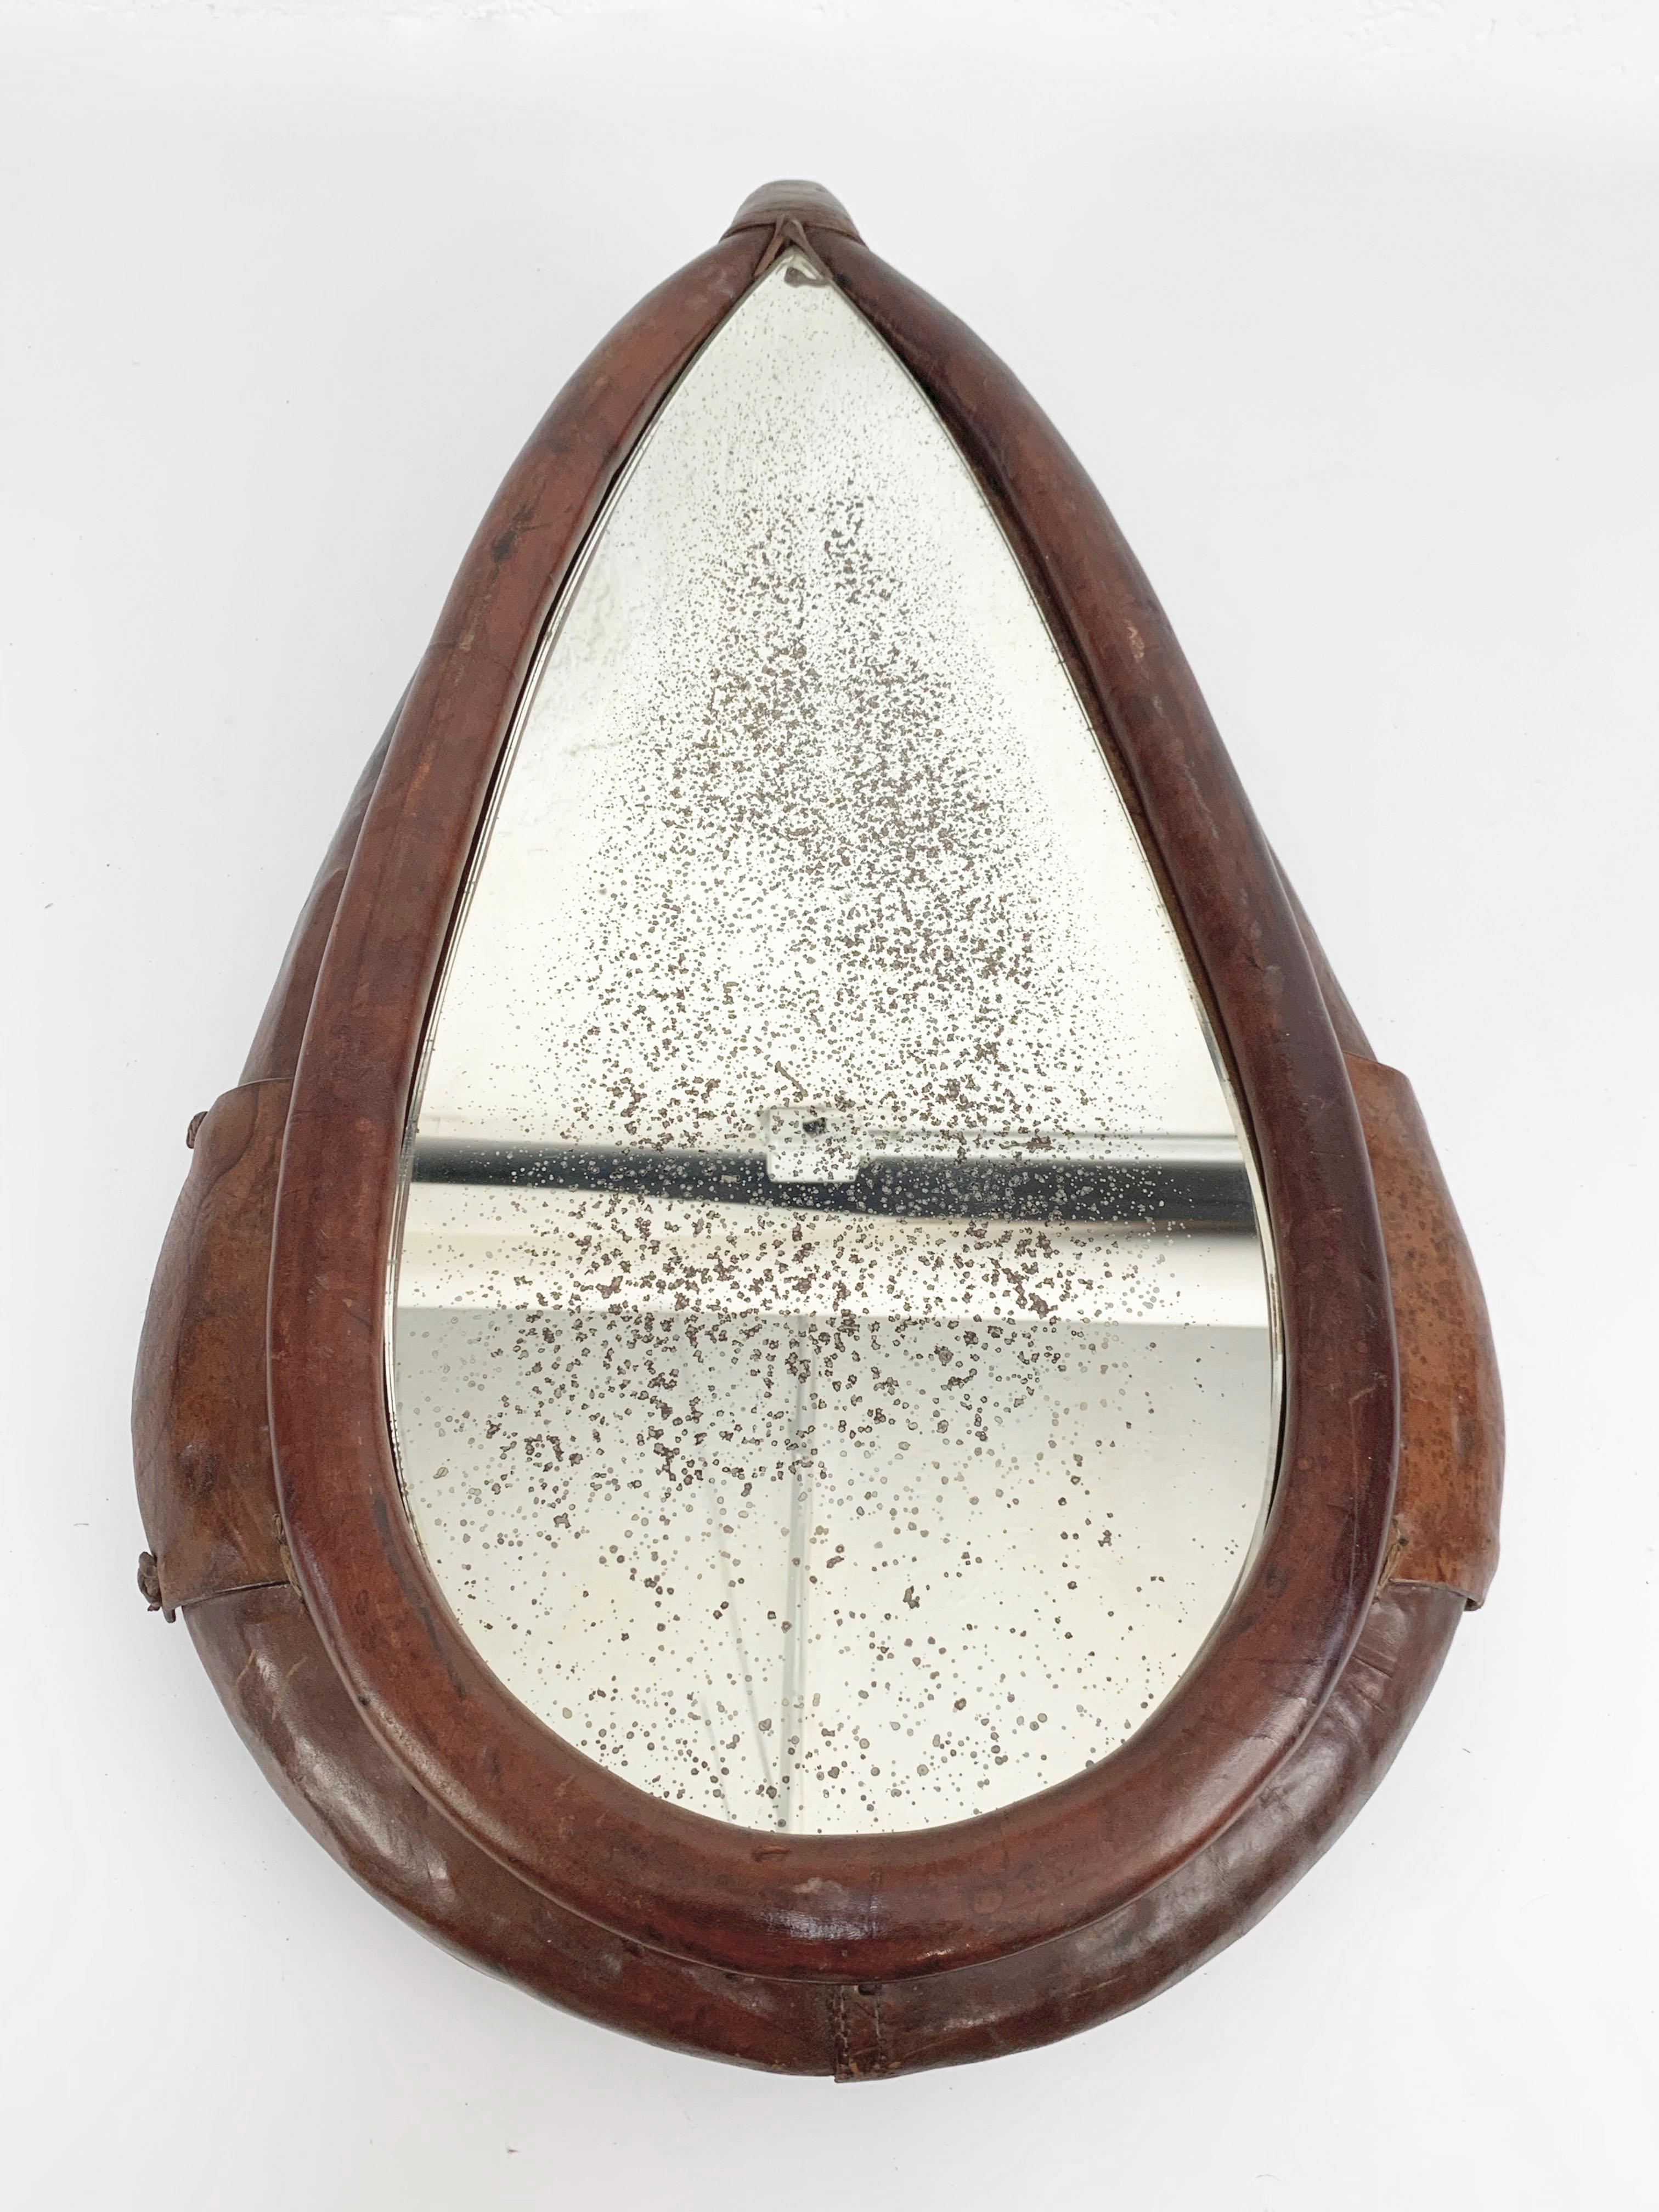 Original decorative collar in leather from 1917, converted into wall mirror.

The producer of the leather collar is K. Petermann, and this unique frame was produced in Dietlikon, Switzerland. The collar has the production number 